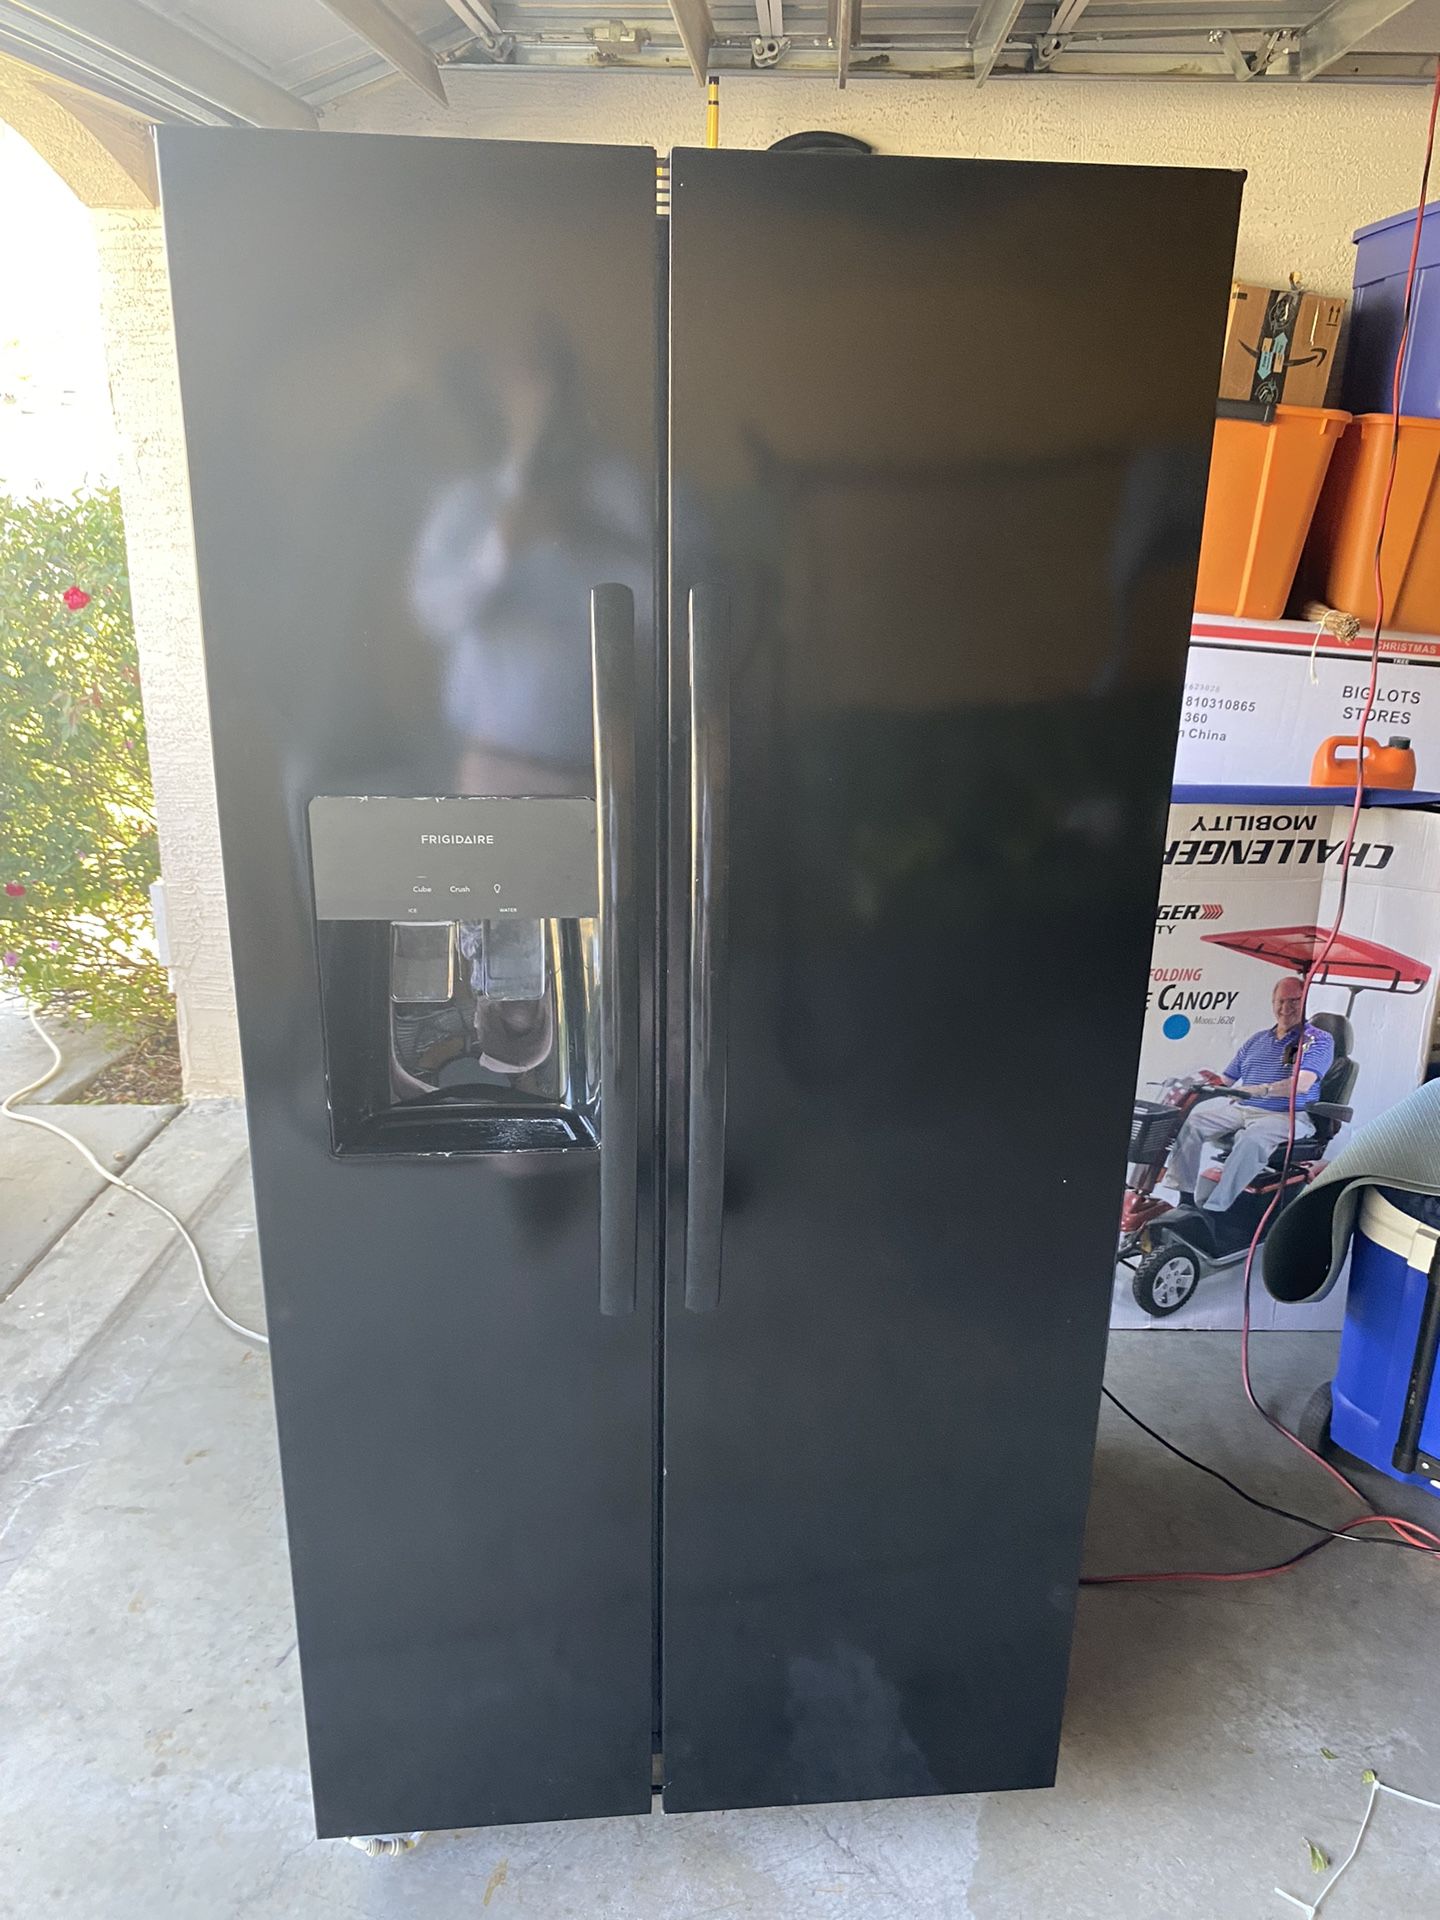 2023 Model Black 25 Cubic Feet Side by Side Refrigerator in like NEW condition